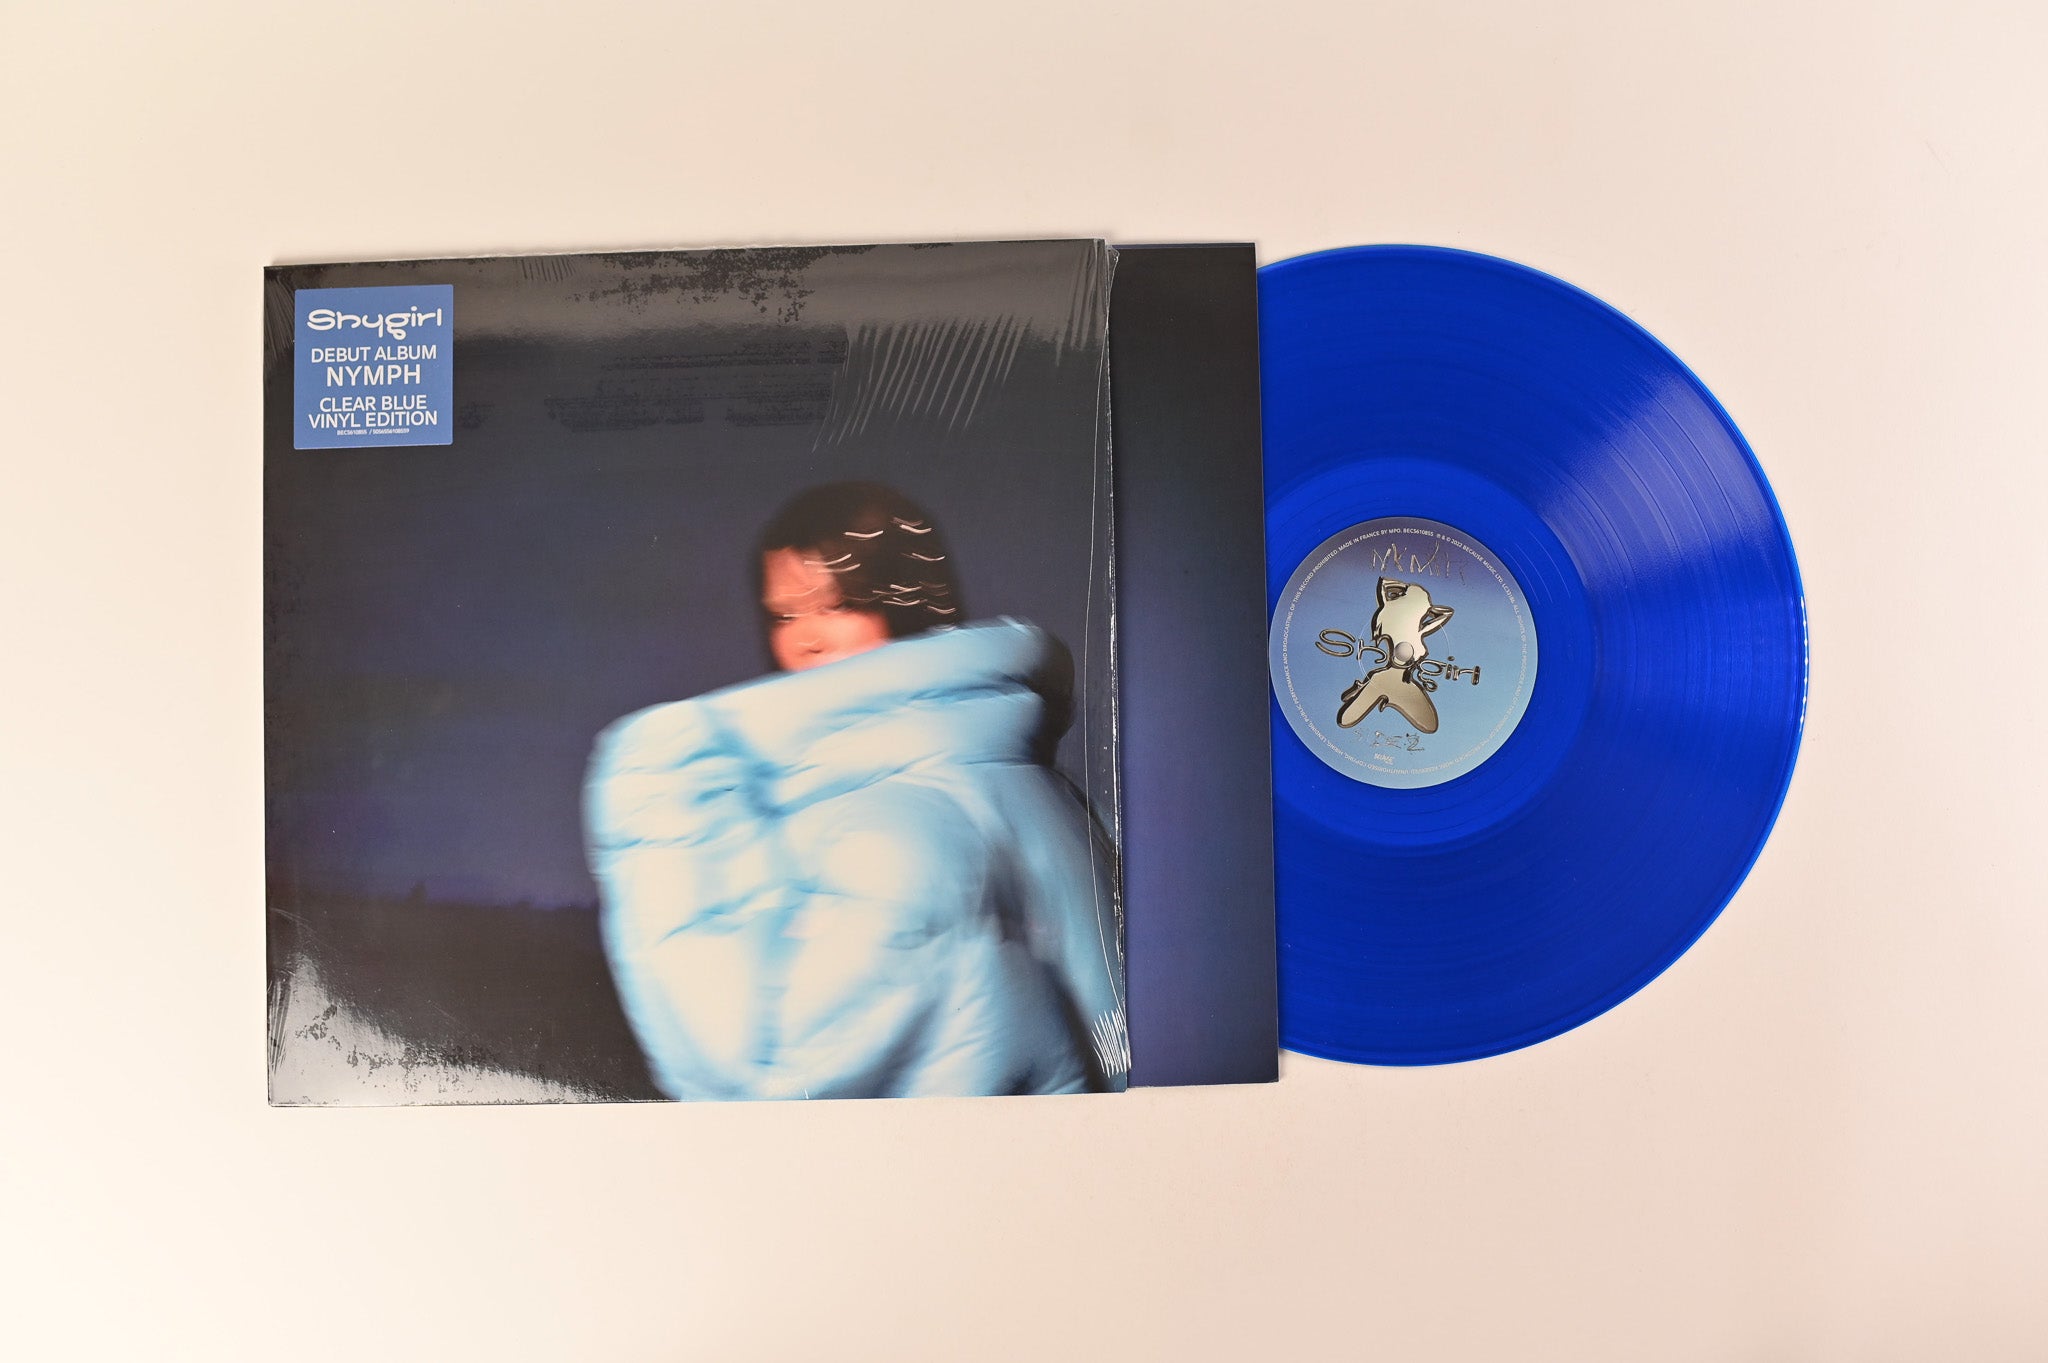 Shygirl - Nymph on Because Music Clear Blue Vinyl